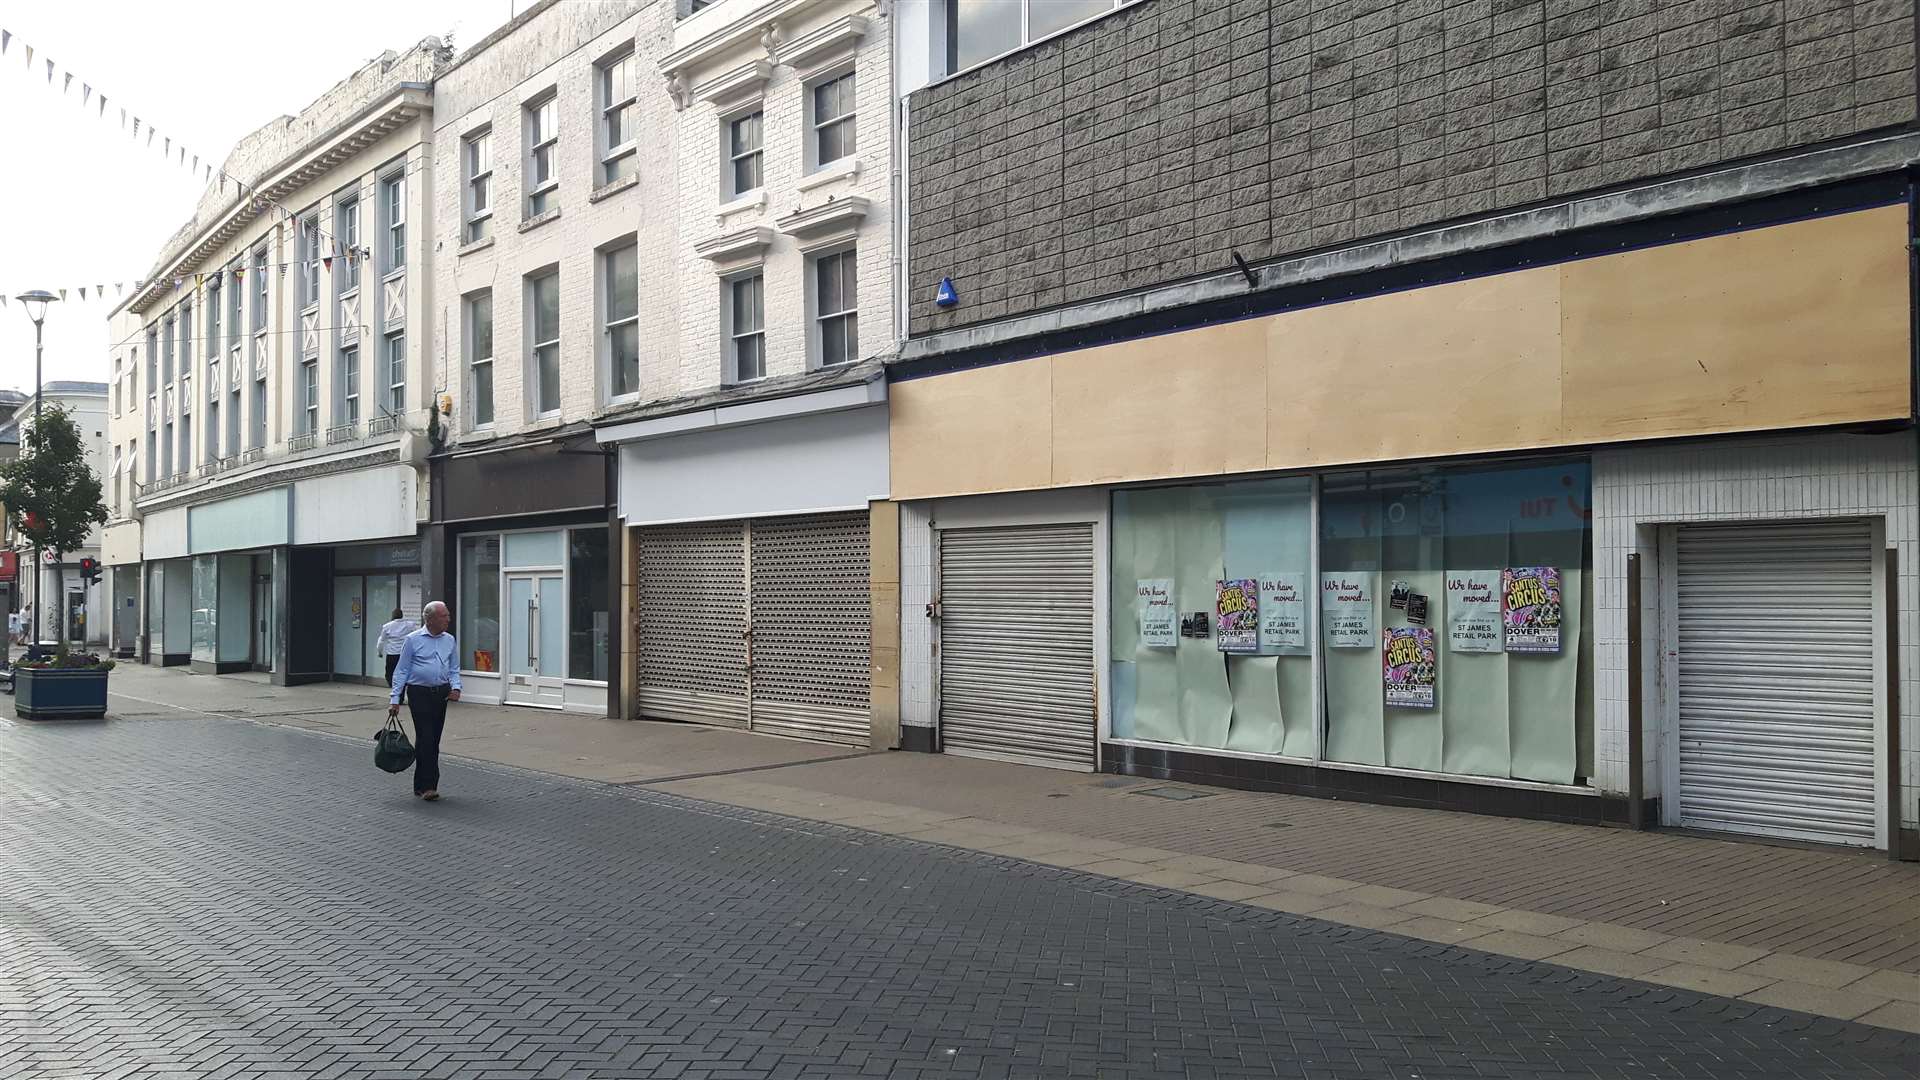 The report said the town centre has had many empty properties, as here in 2018.